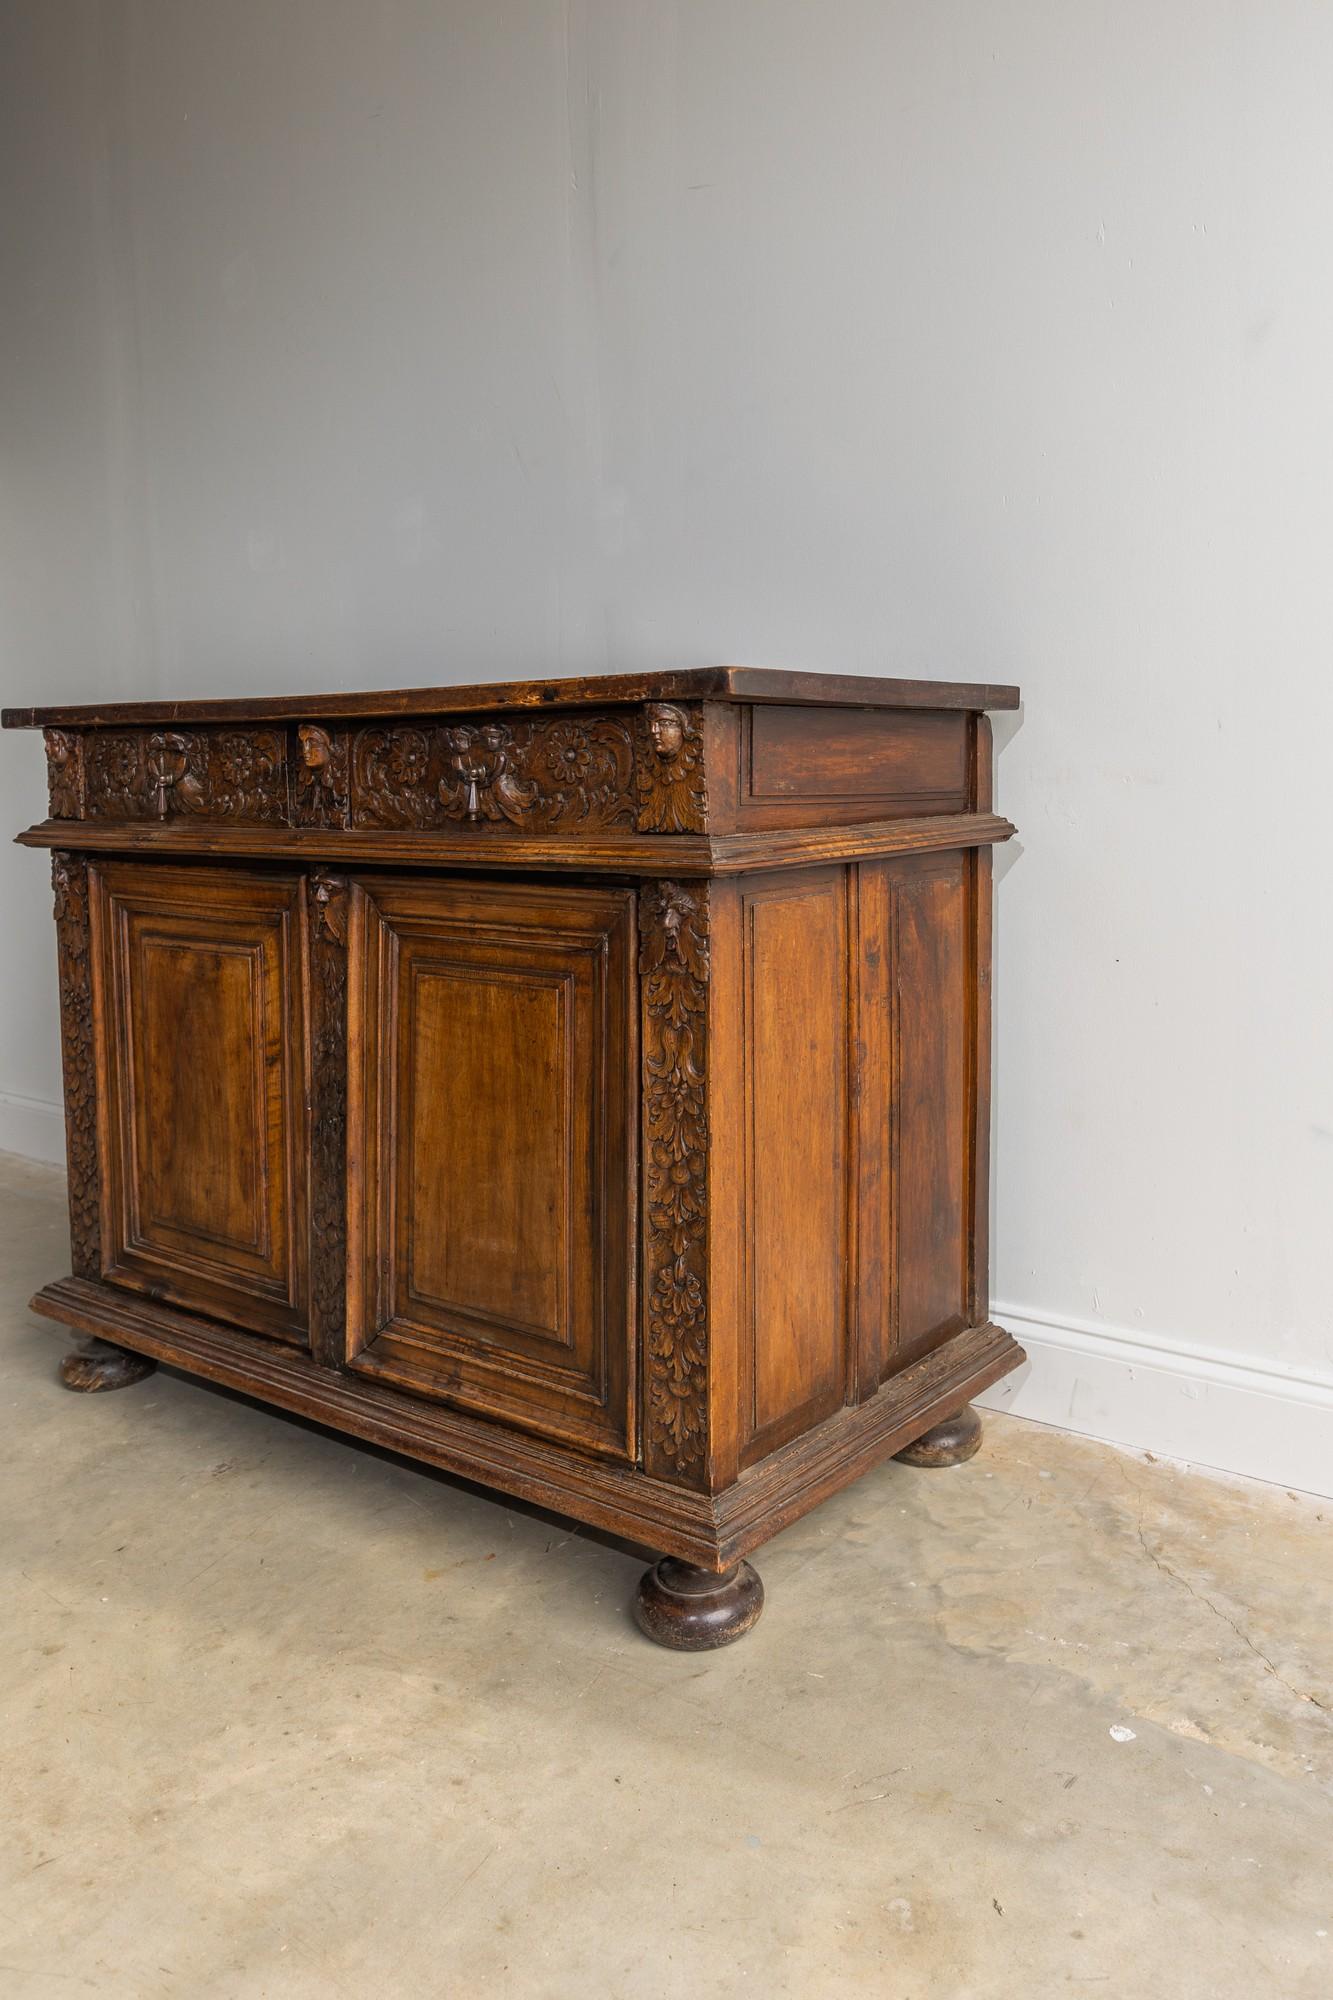 This walnut buffet is a truly beautiful and one of a kind piece. The hand carved details are stunning and the finish of the stain gives this chest a dark and moody feel. There are 3 faces hand carved across the top front of the chest, and there are